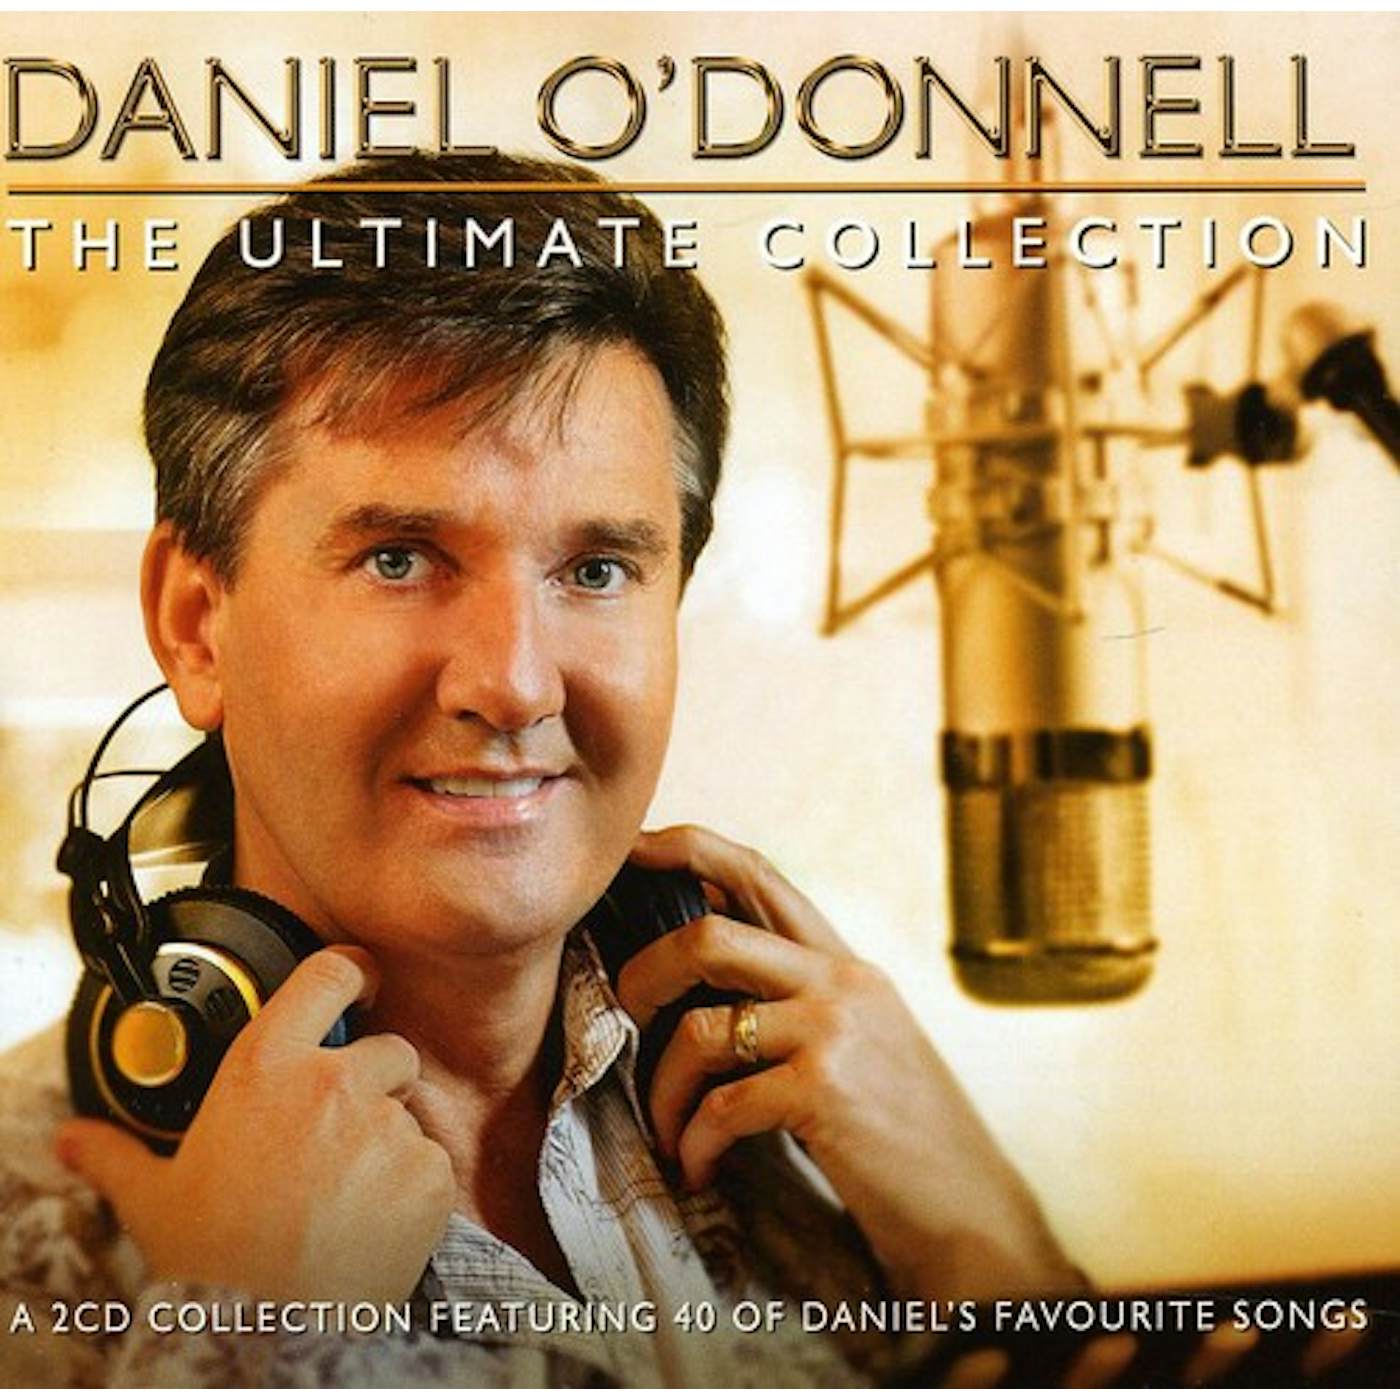 Daniel O'Donnell ULTIMATE COLLECTION CD